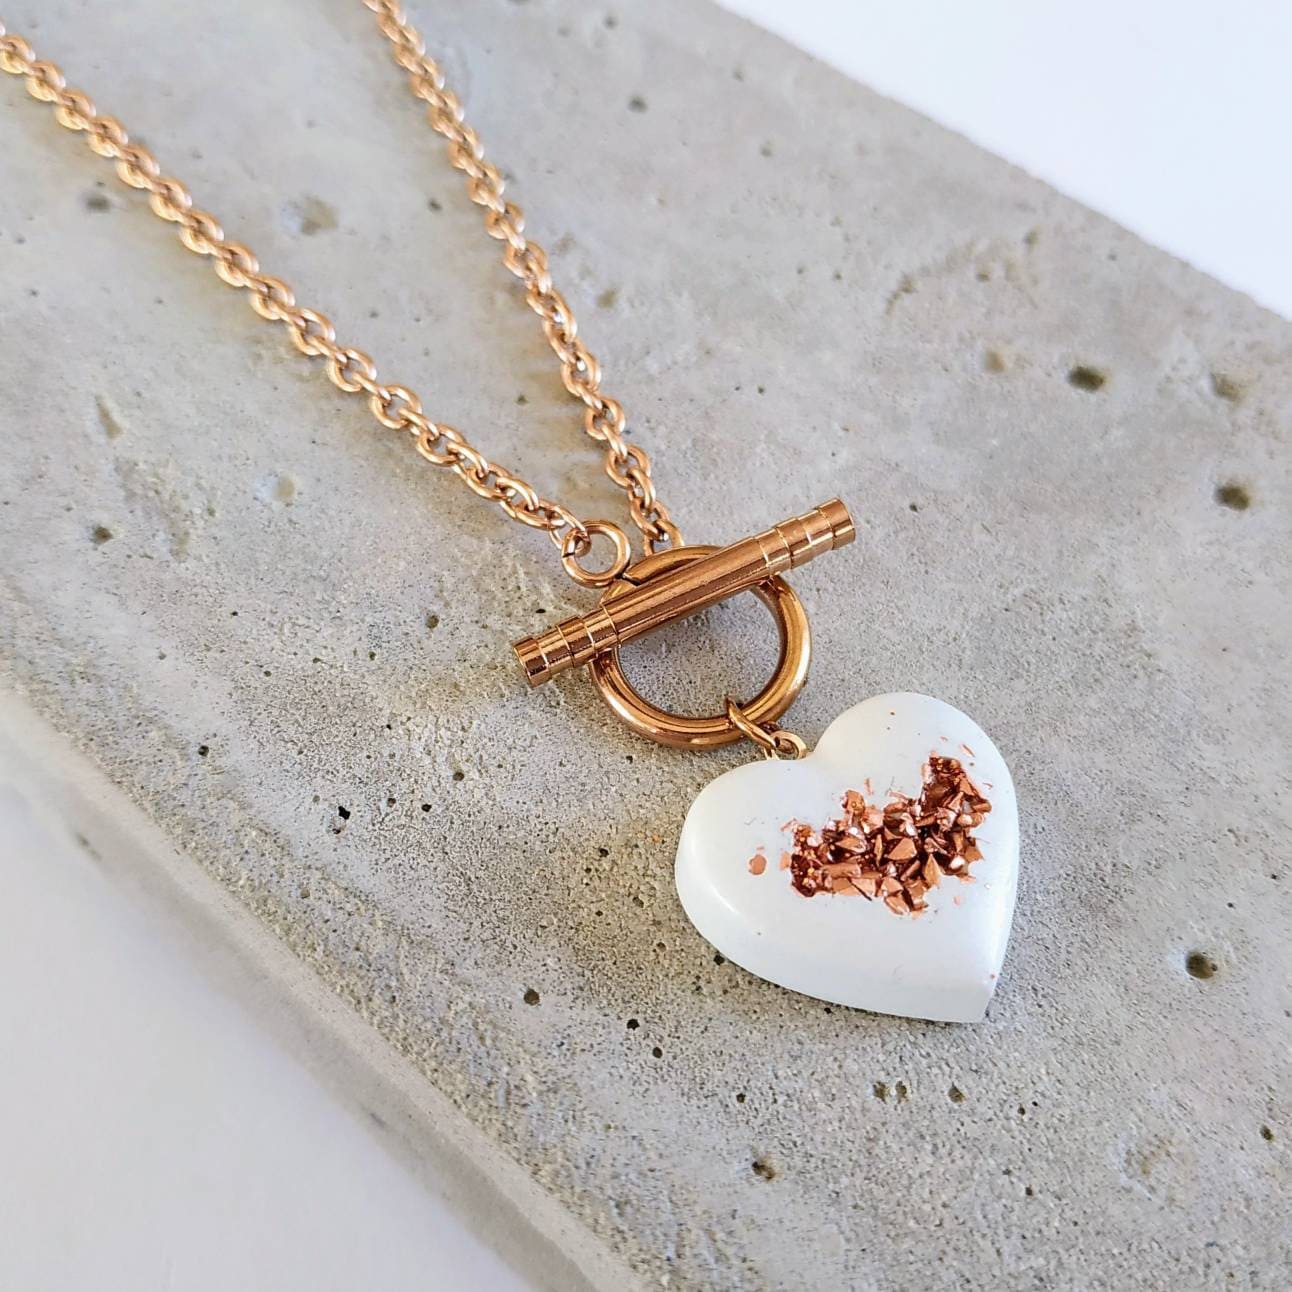 Concrete jewelry chain rosegold recycled copper crystals valentine's day gift girlfriend